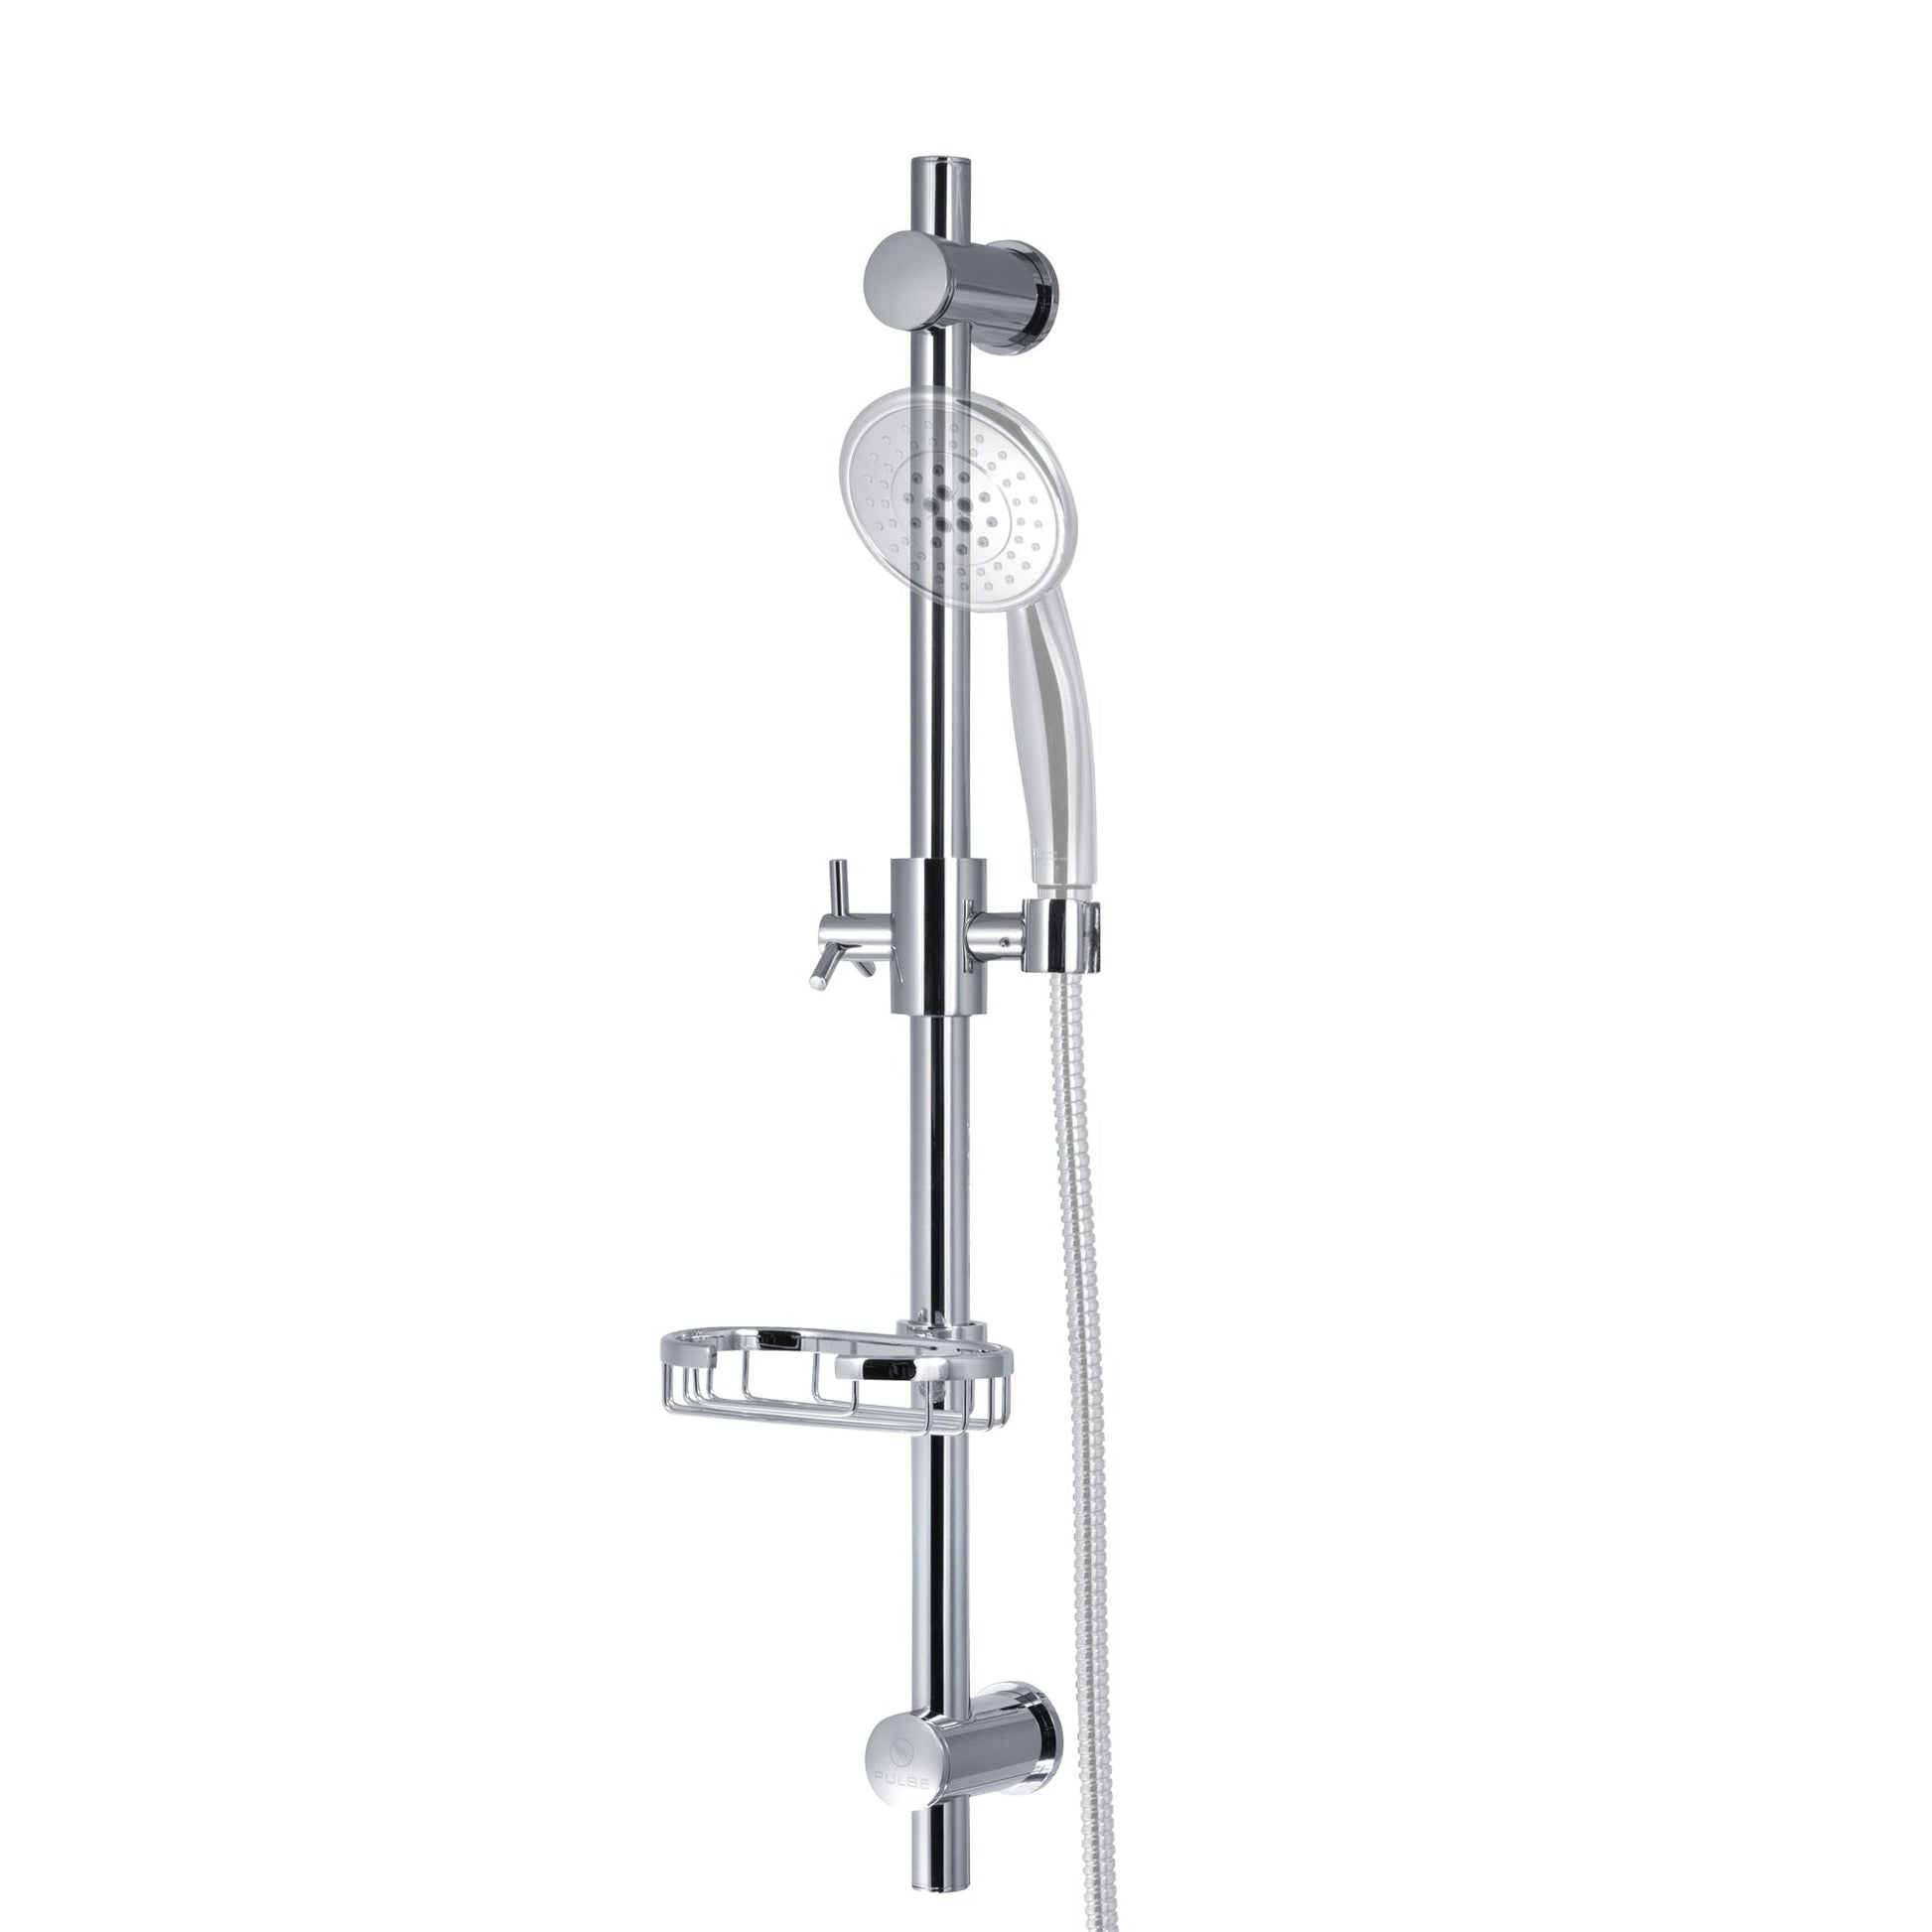 PULSE ShowerSpas Adjustable Slide Bar With Built-in Soap Dish Shower System Accessory in Chrome Finish